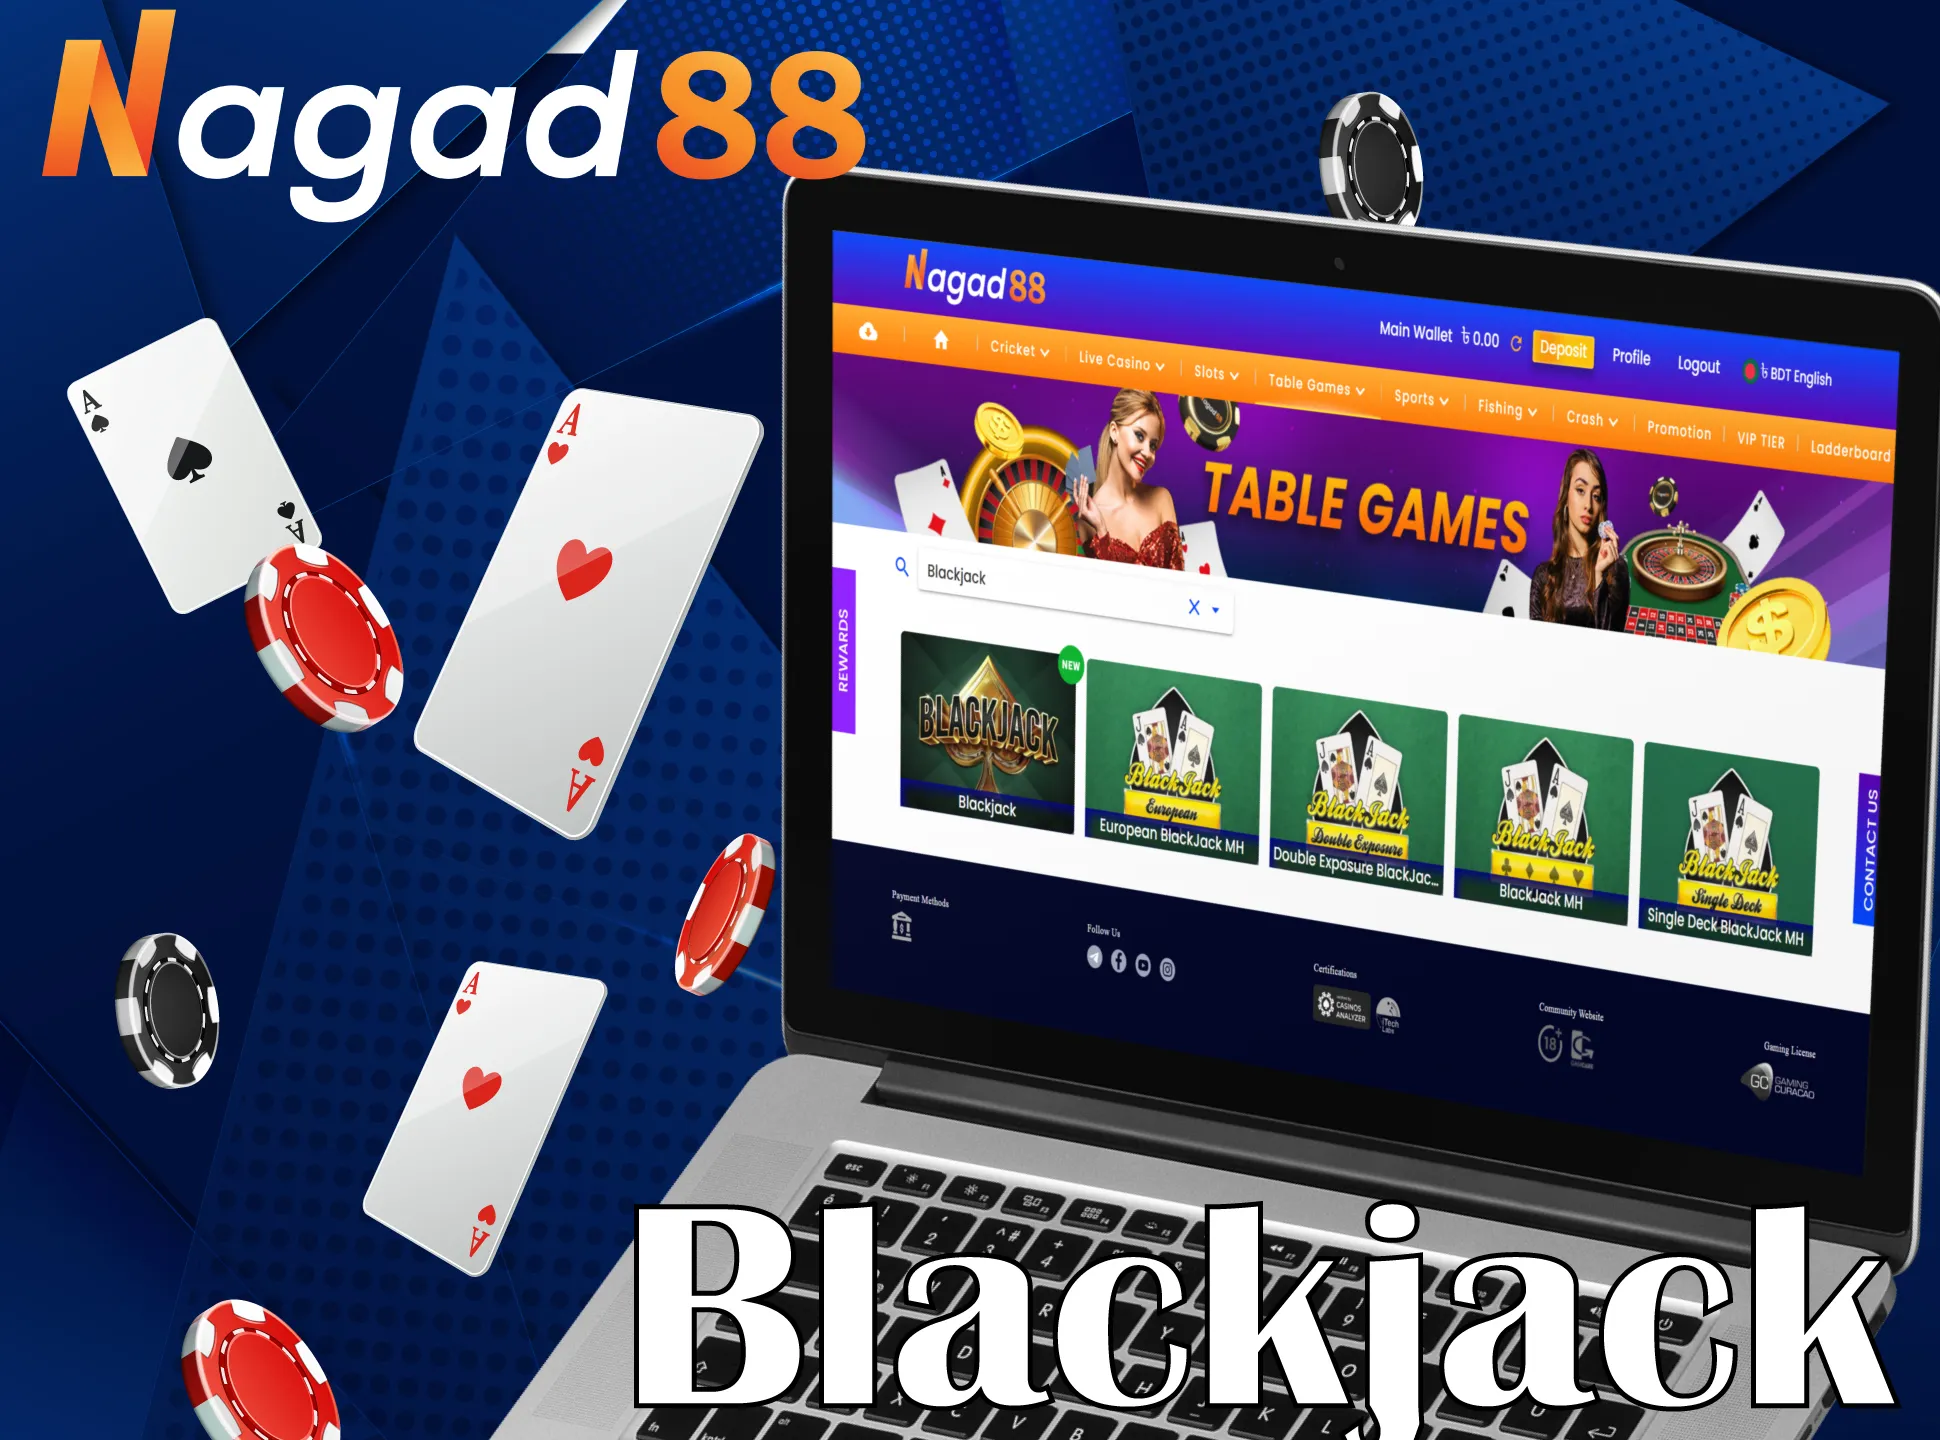 Play exciting blackjack with Nagad88.